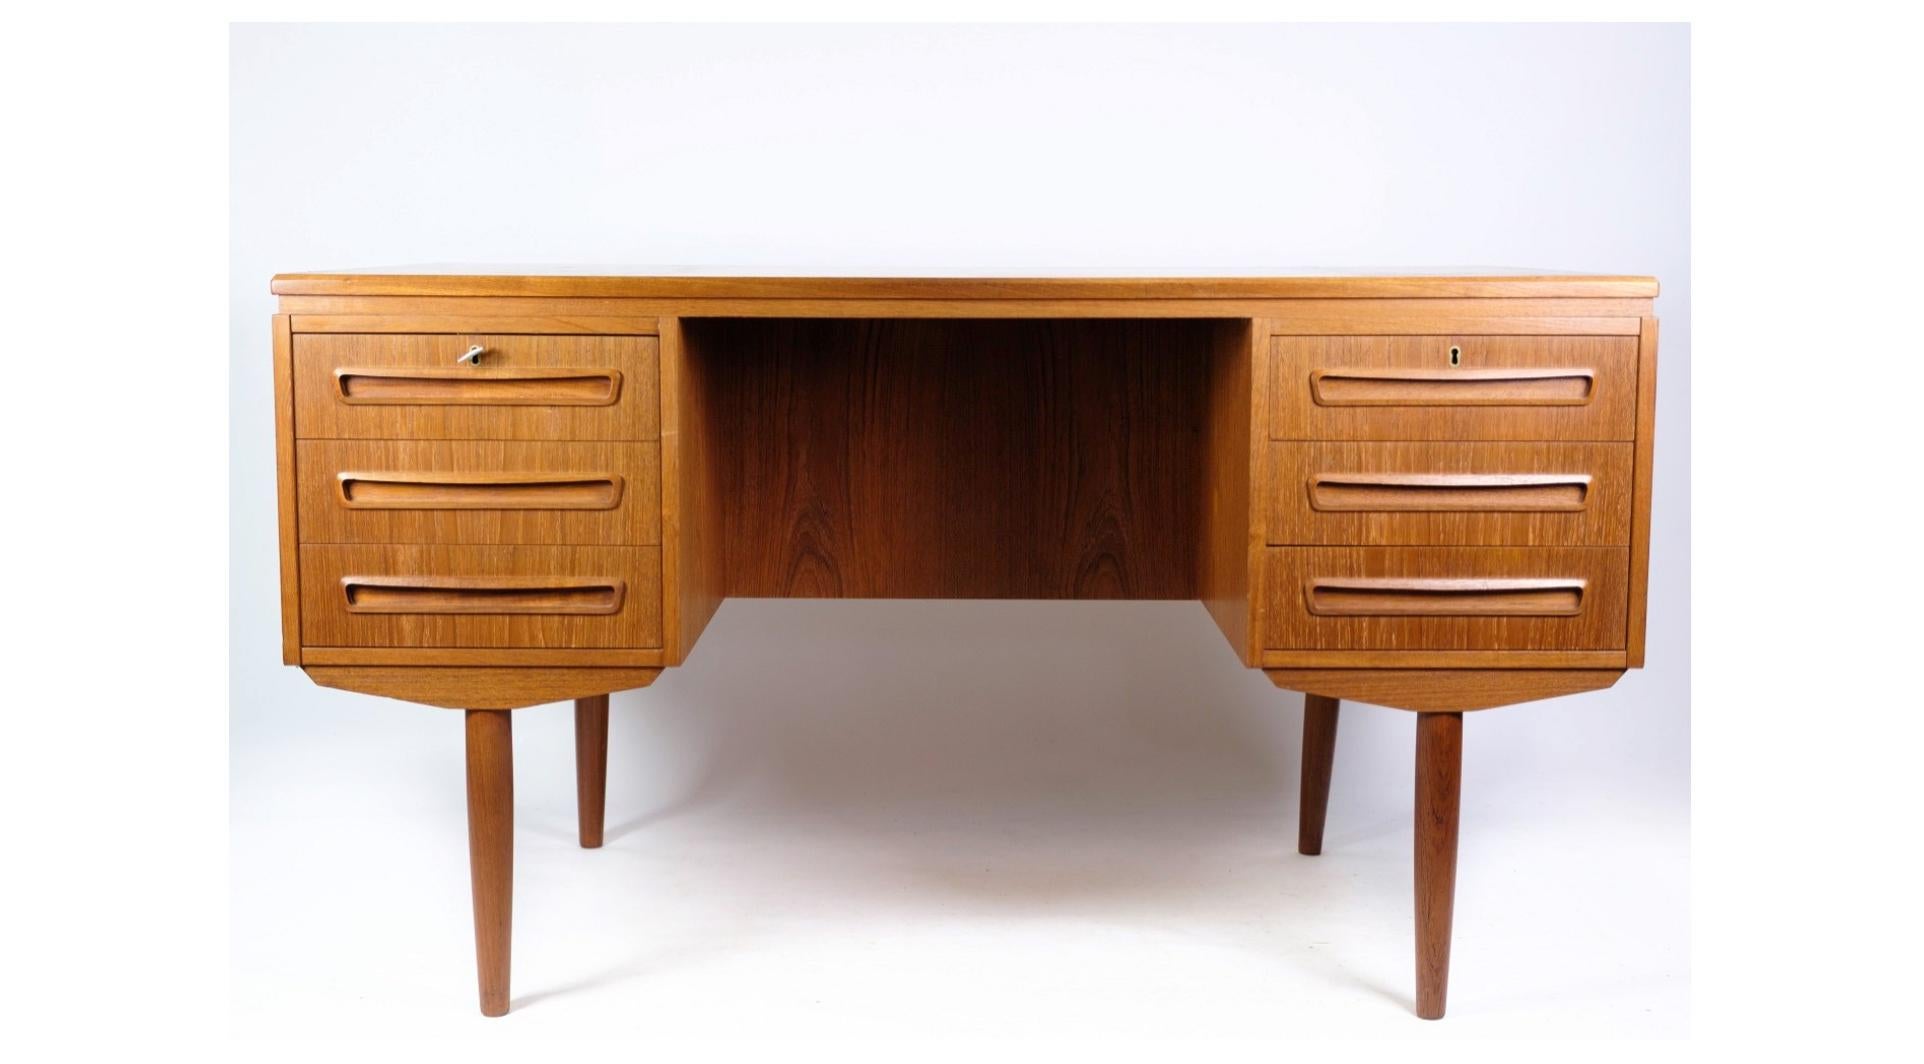 The desk in teak wood, manufactured by AP Møbler Svenstrup in the 1960s, represents the high quality and stylish design characteristic of Danish furniture production from that time.

With its beautiful teak wood design, the desk radiates warmth and